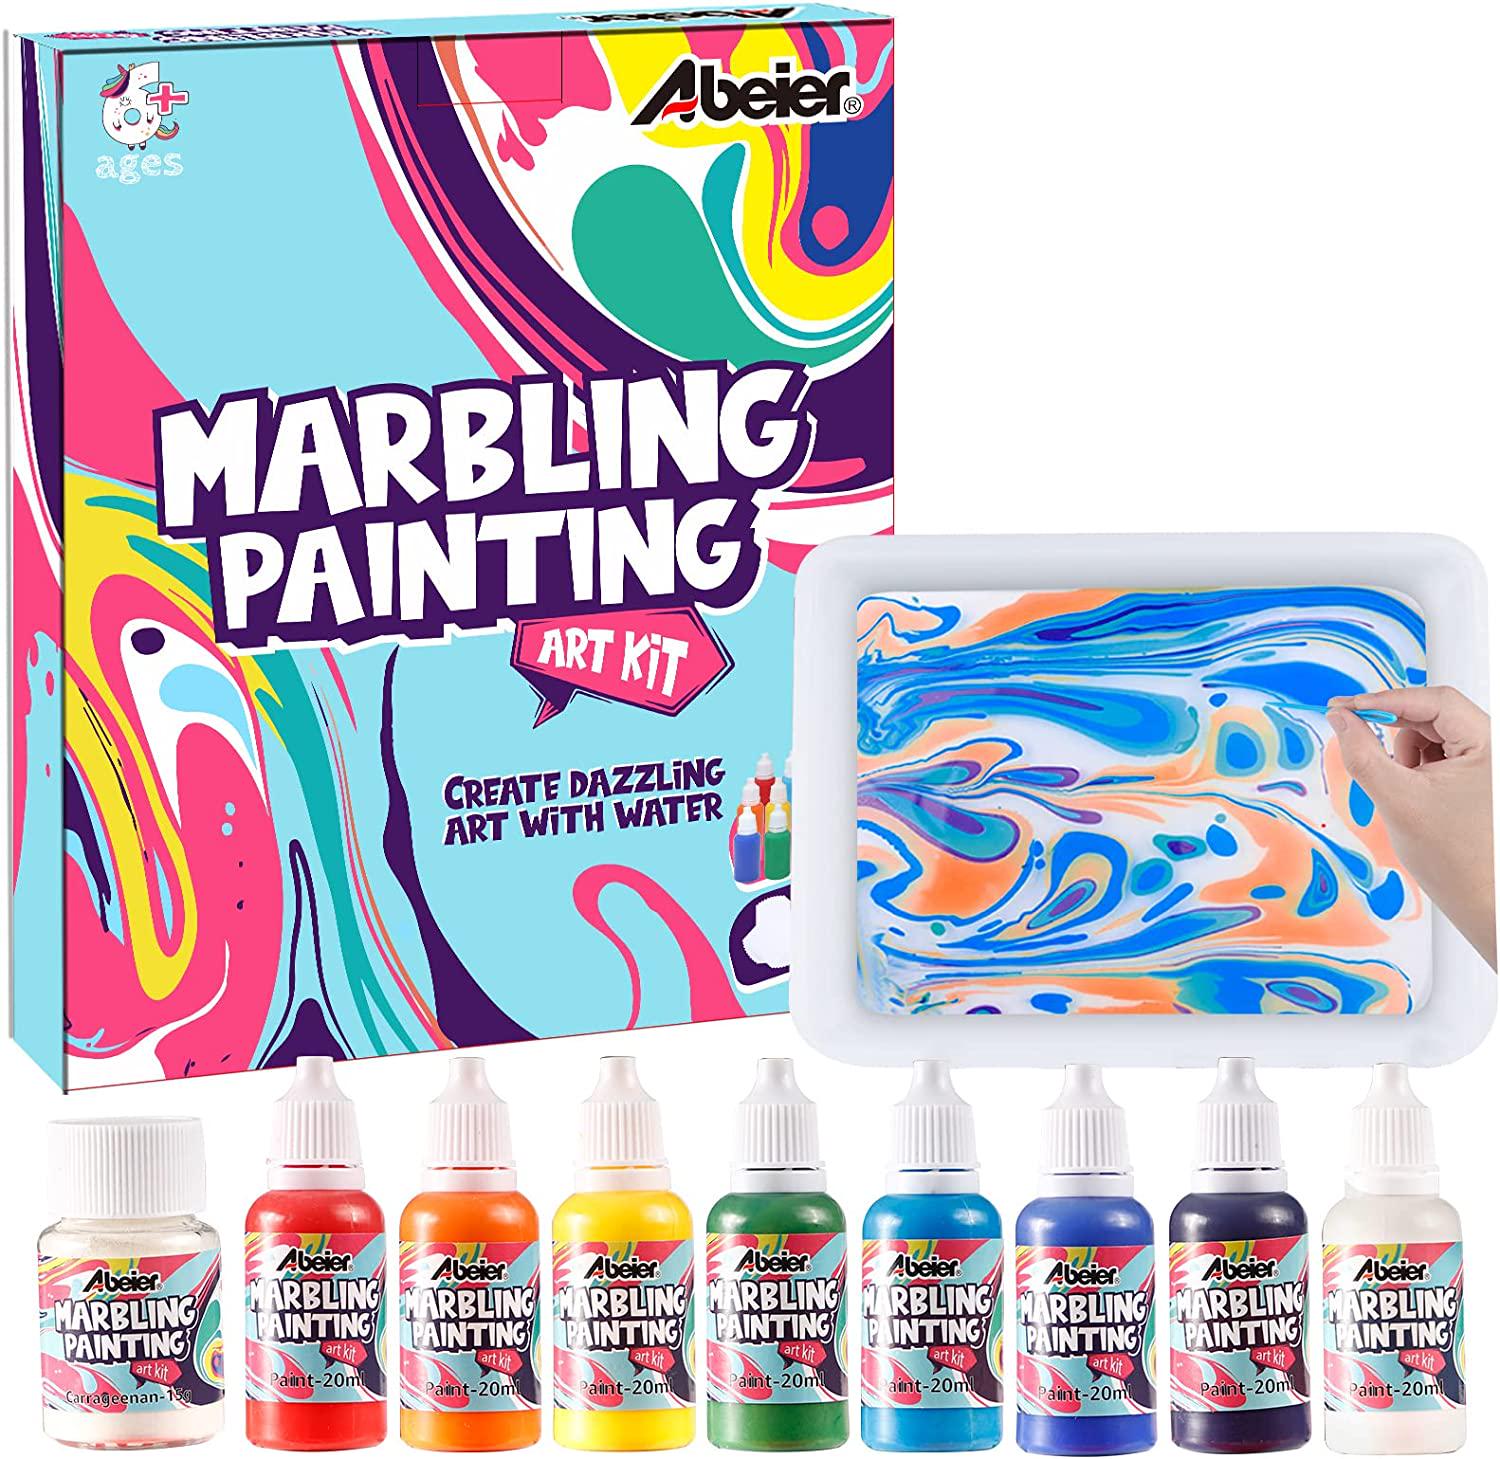 ABEIER, Marbling Paint Kit For Kids, Arts and Crafts for Teens, Preteens, Kids Ages 6-12 - Creative Toys Gifts for Girls and Boys Ages 4 5 6 7 8 9 10 11 12(Marble Paint on Water, 8Colors/20ml)